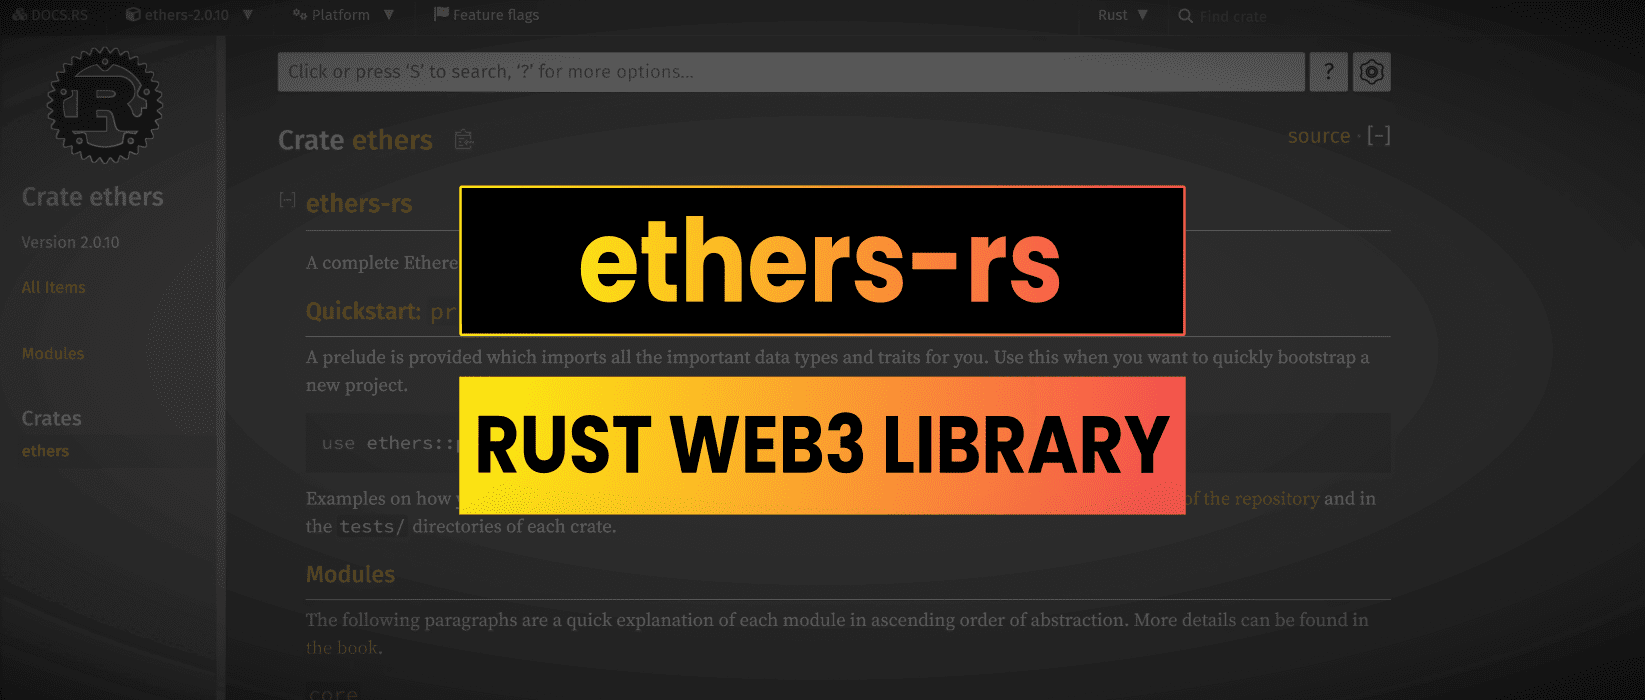 Ethers-rs Tutorial | The Rust Web3 Library